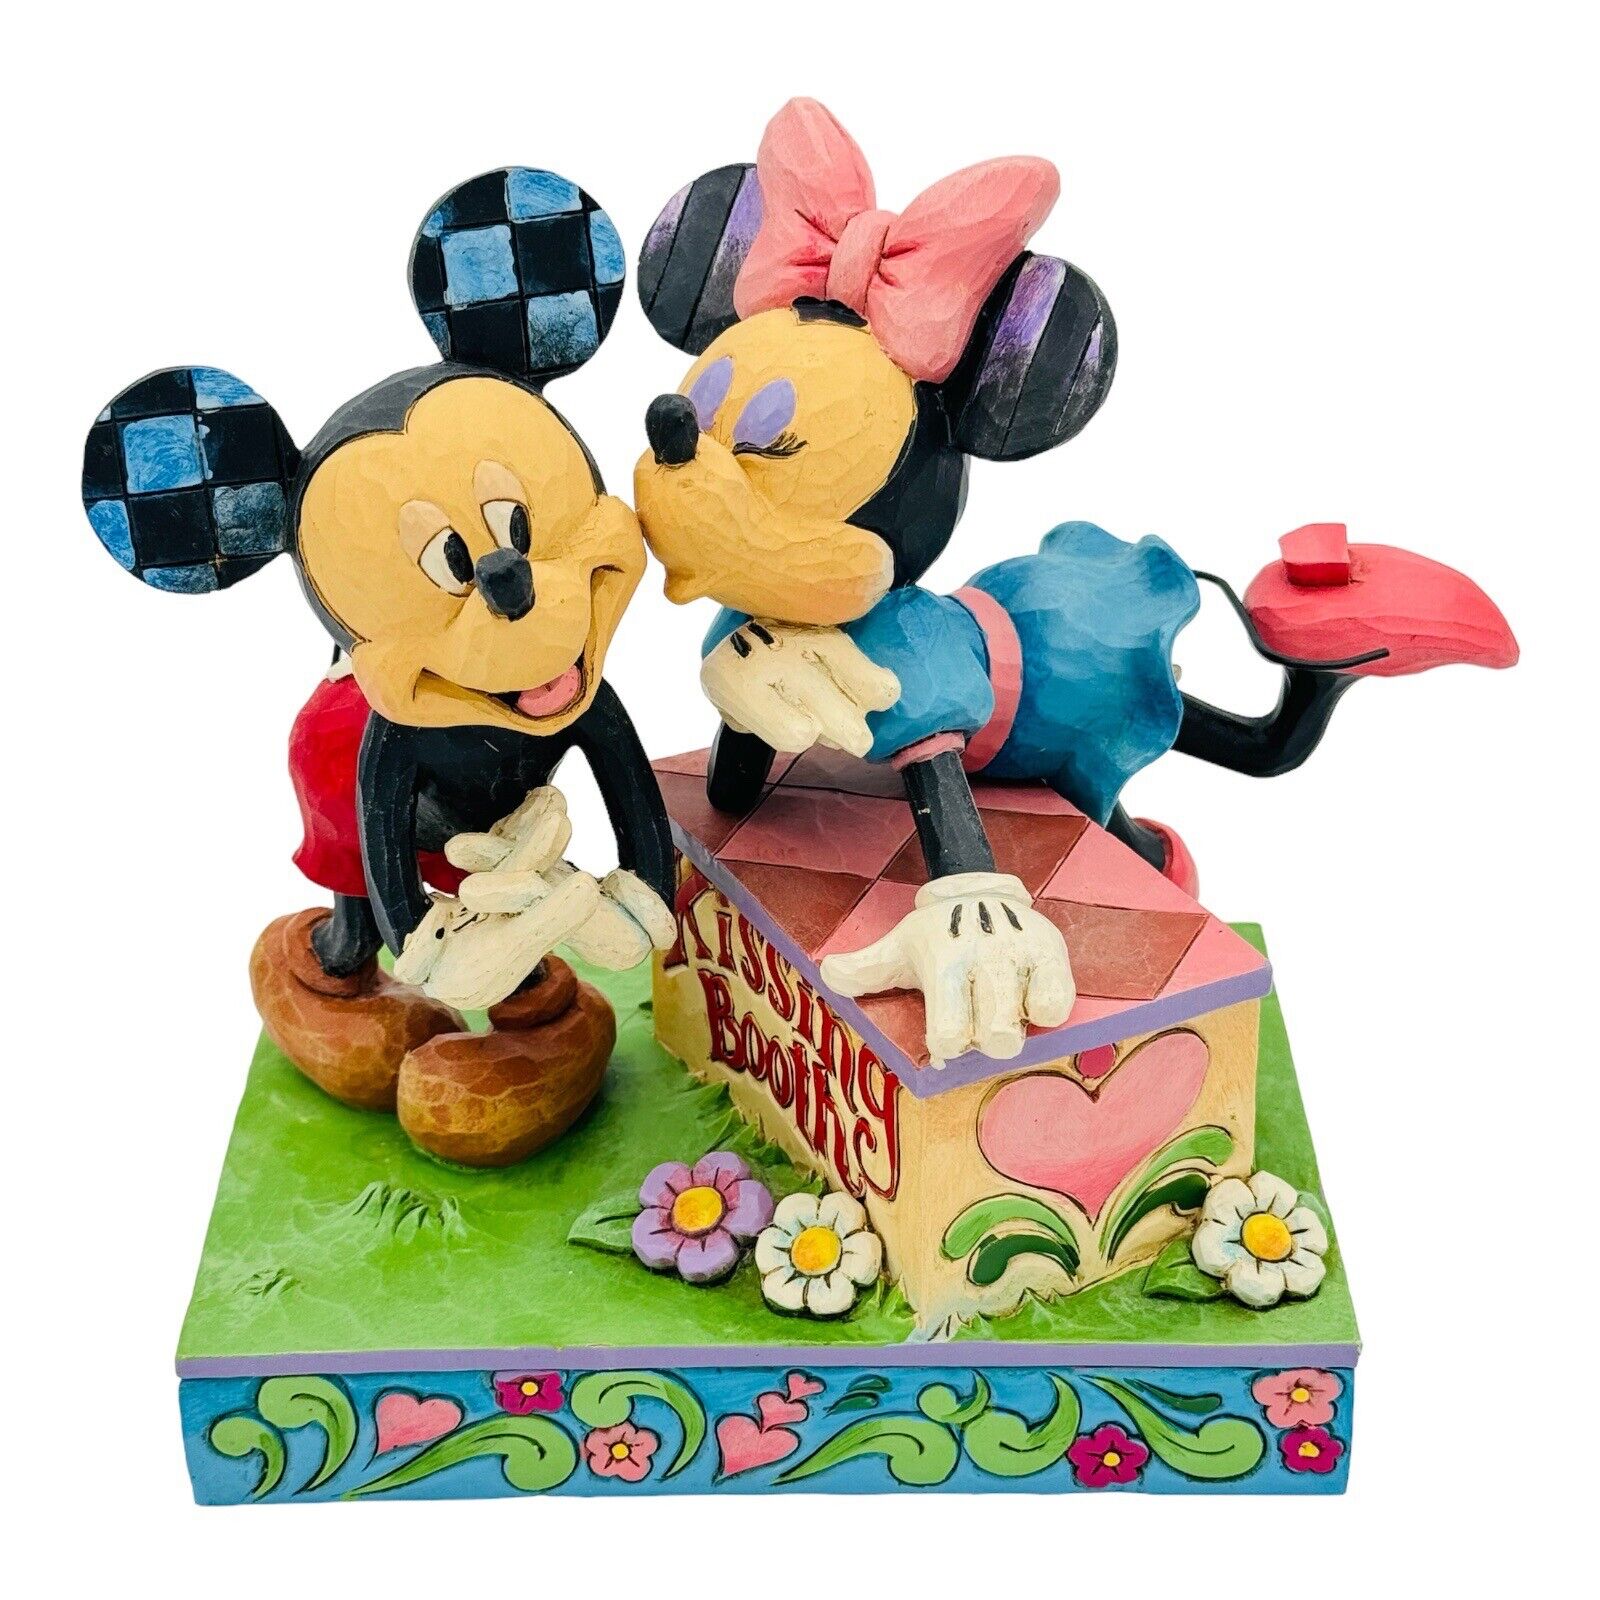 Jim Shore Disney Kissing Booth #6000970 Mickey Mouse & Minnie Mouse